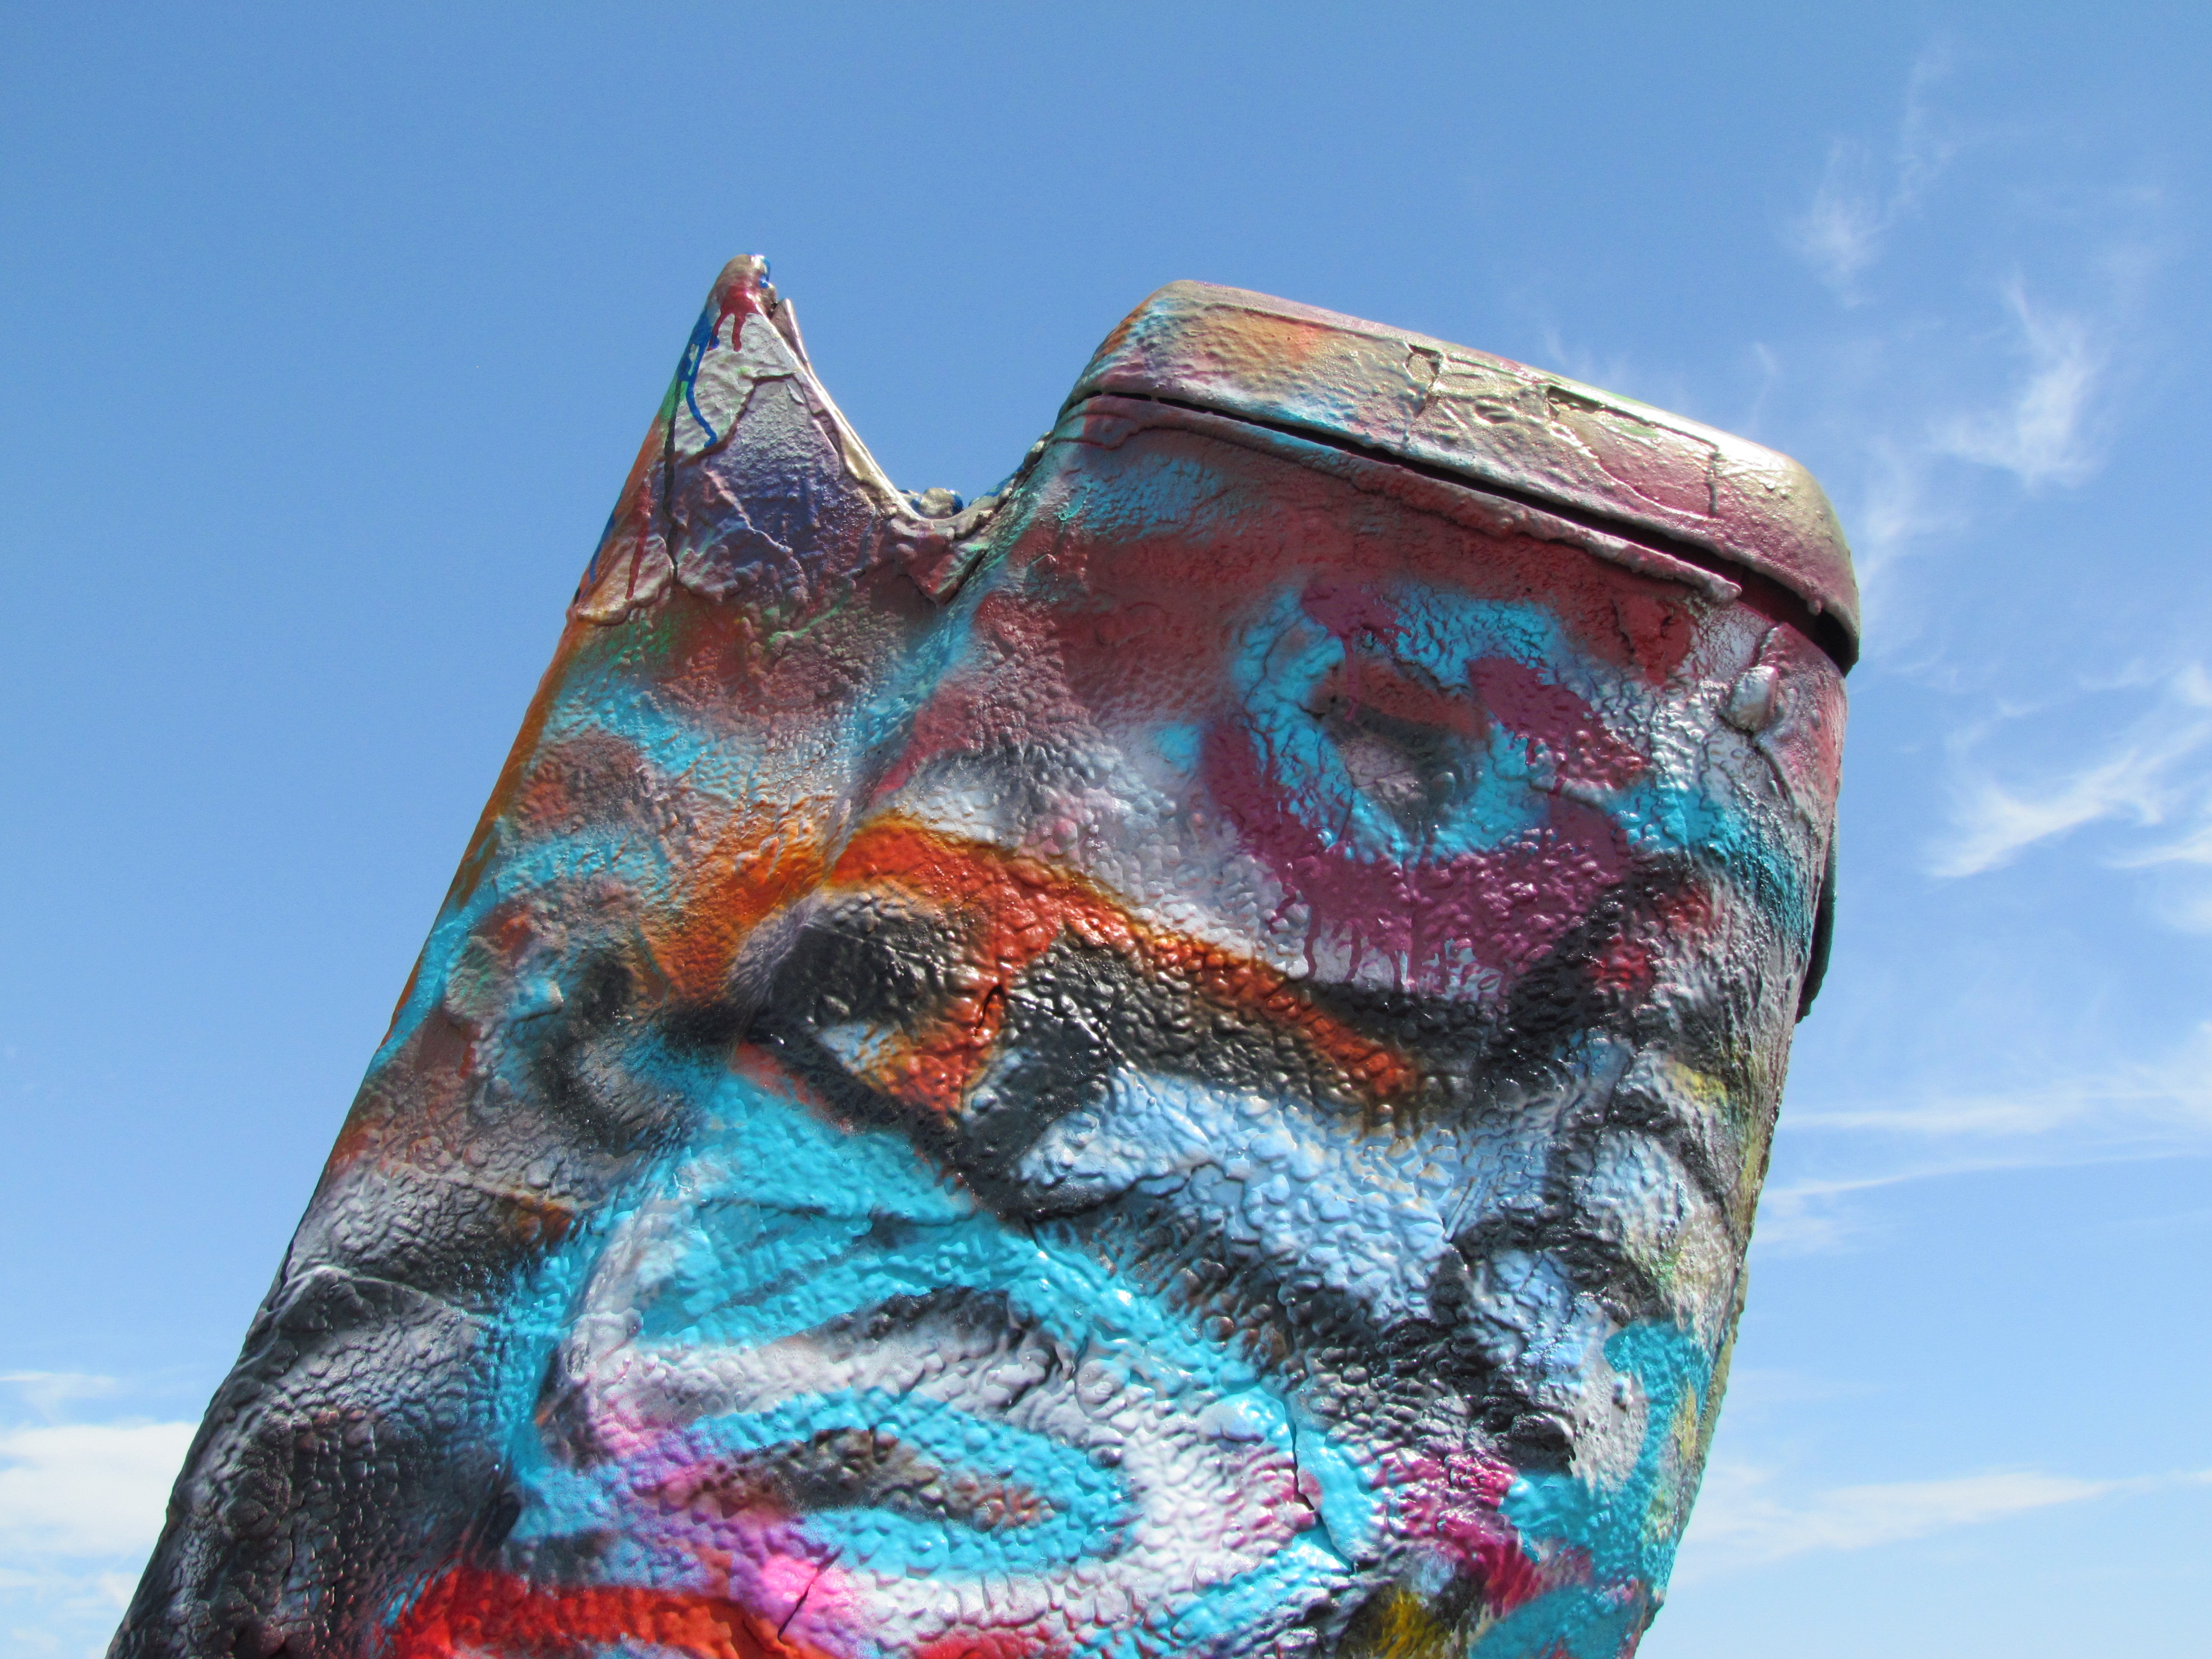 Cadillac Ranch, Leaving your mark (or not) at Cadillac Ranch, ClassicCars.com Journal